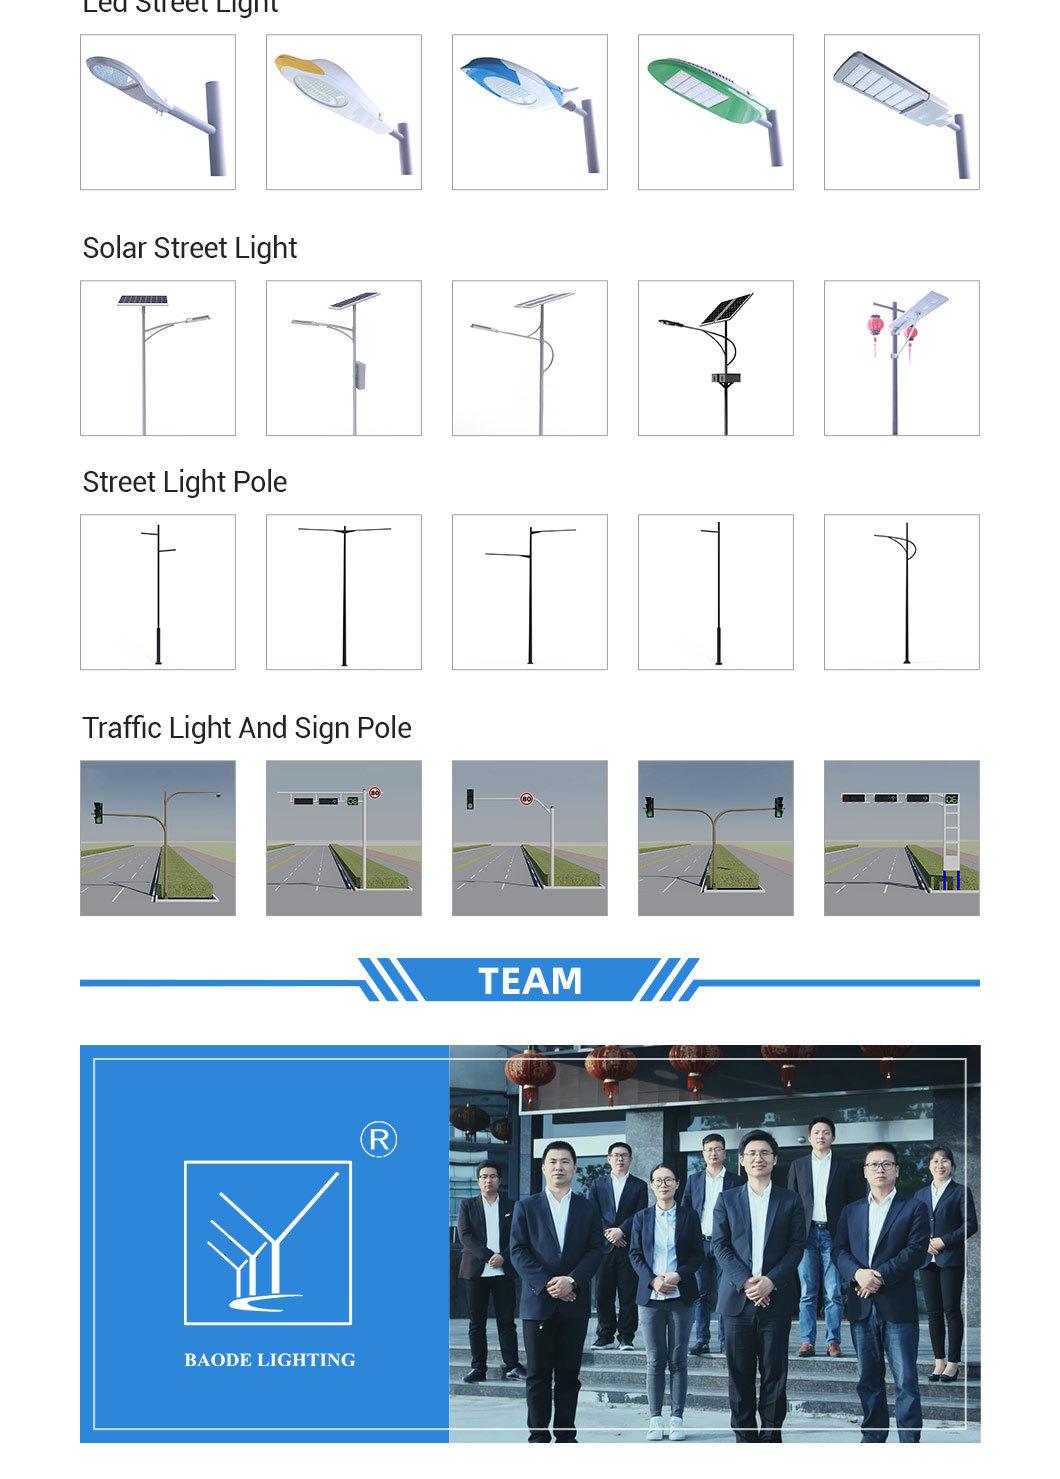 Hot Sale Prices of 7m 8m 9m 10m Street Light Pole with Best Price